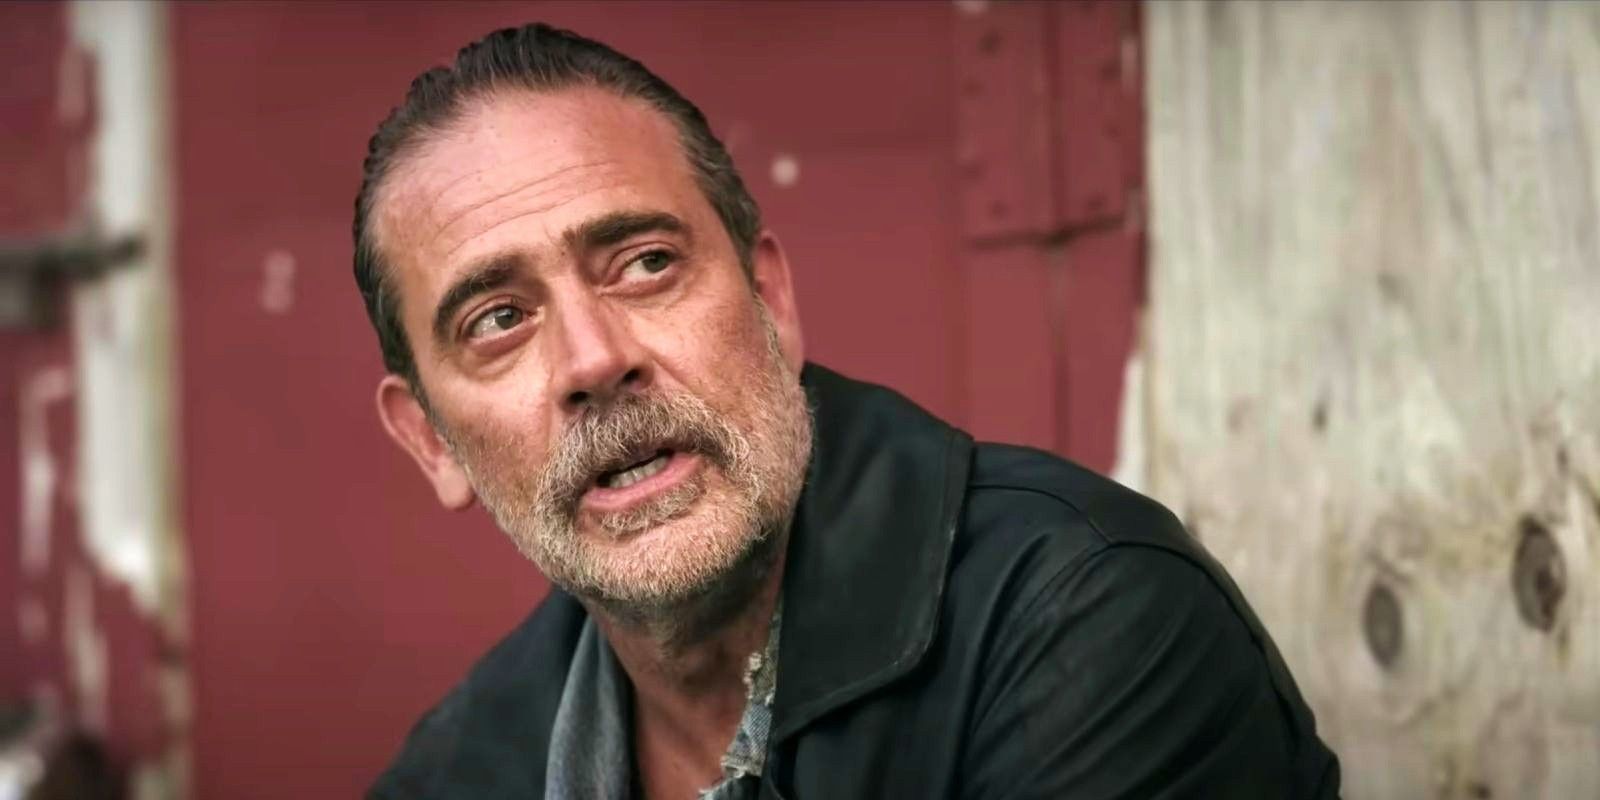 Negan looking up while speaking to Maggie in The Walking Dead Dead City trailer